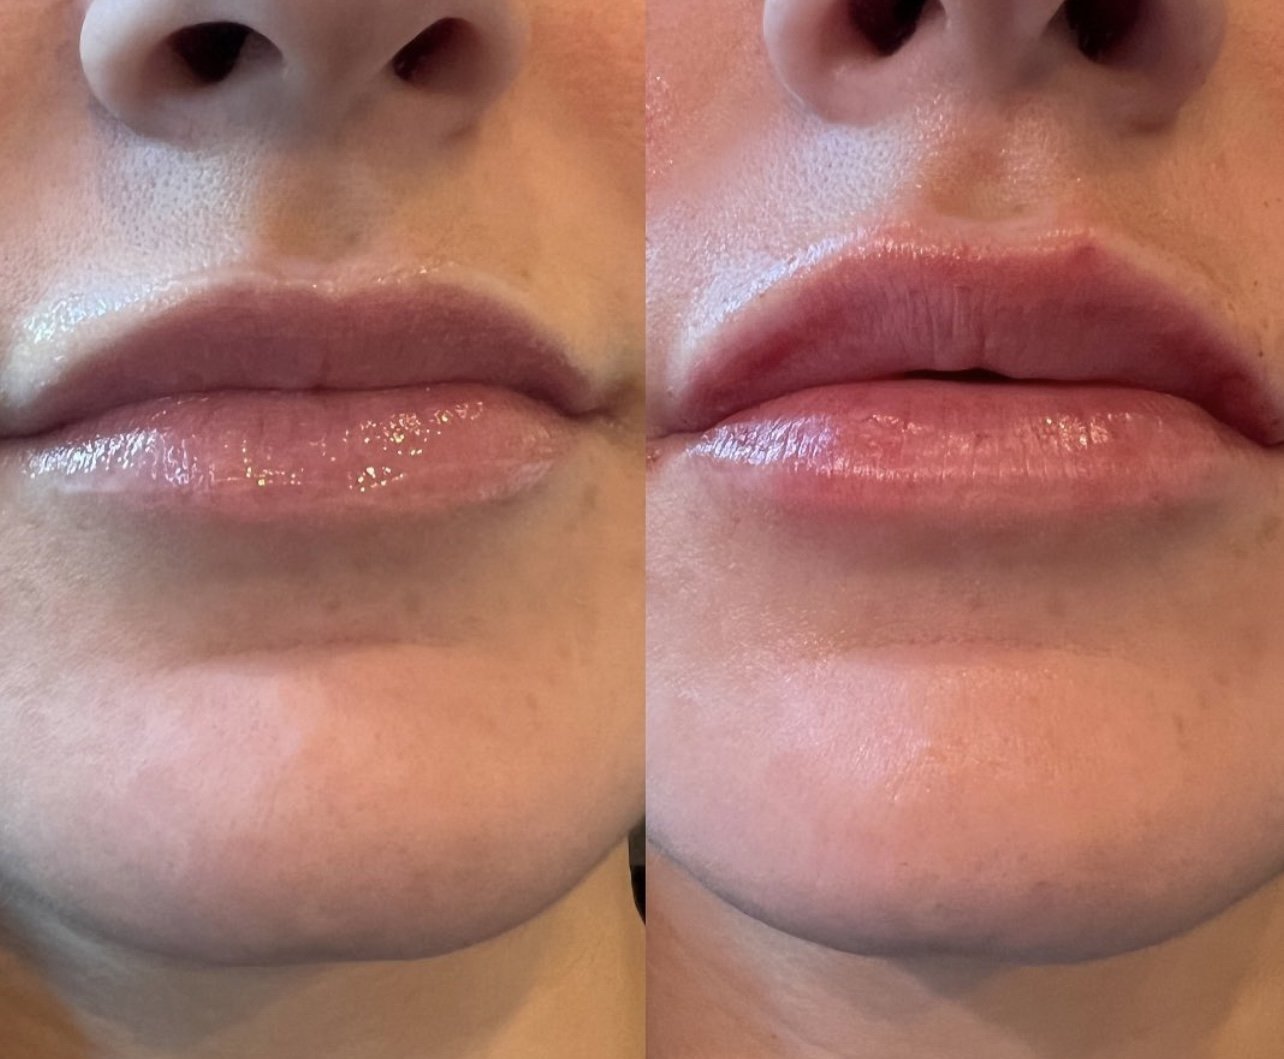 juicy lips always 🫦

take advantage of our lip filler special: Get 10% off when you buy 1/2 syringe, 20% off for 1 syringe, and a stunning 30% off when you buy 2 syringes. book at the link in bio (downtown only). 

injections by @injector.nikki 

#k